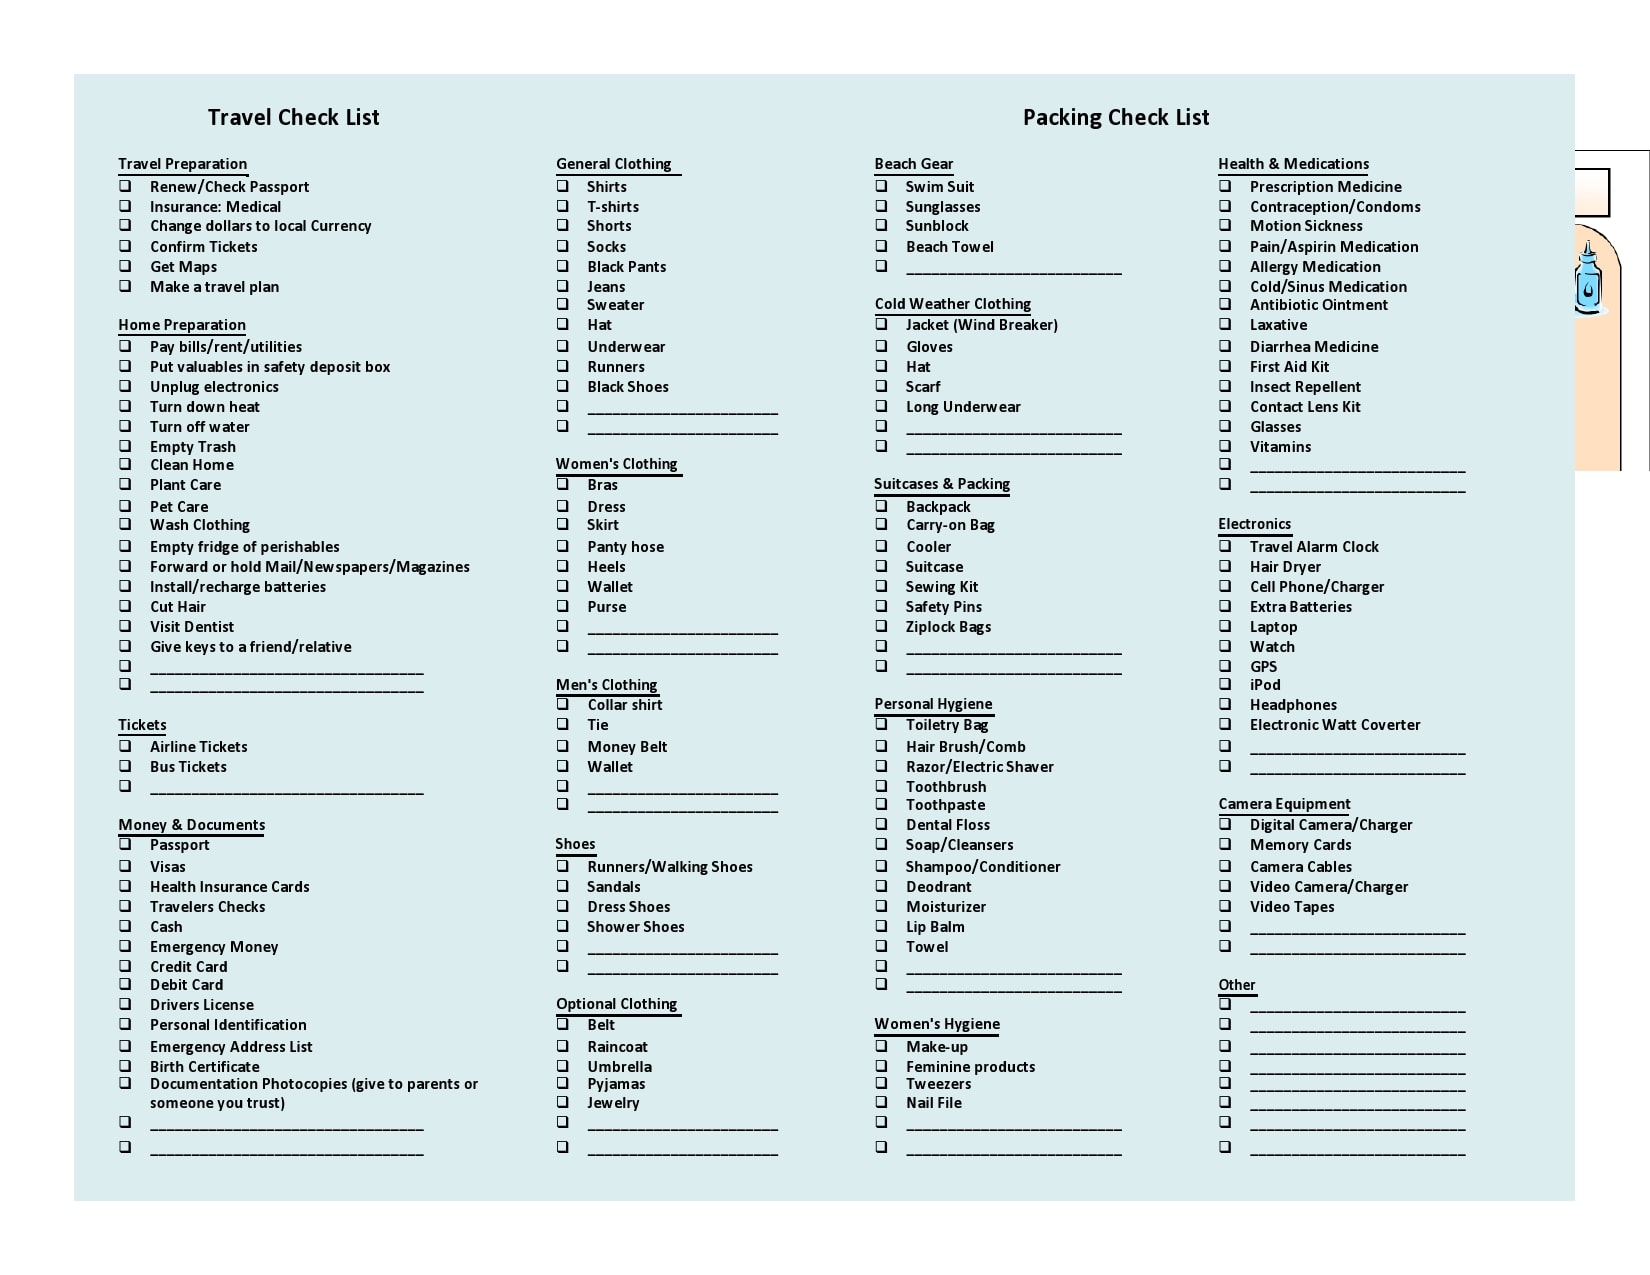 10 Packing List Templates [Excel, Word, PDF] - TemplateArchive Inside Business Travel Checklist Template Within Business Travel Checklist Template